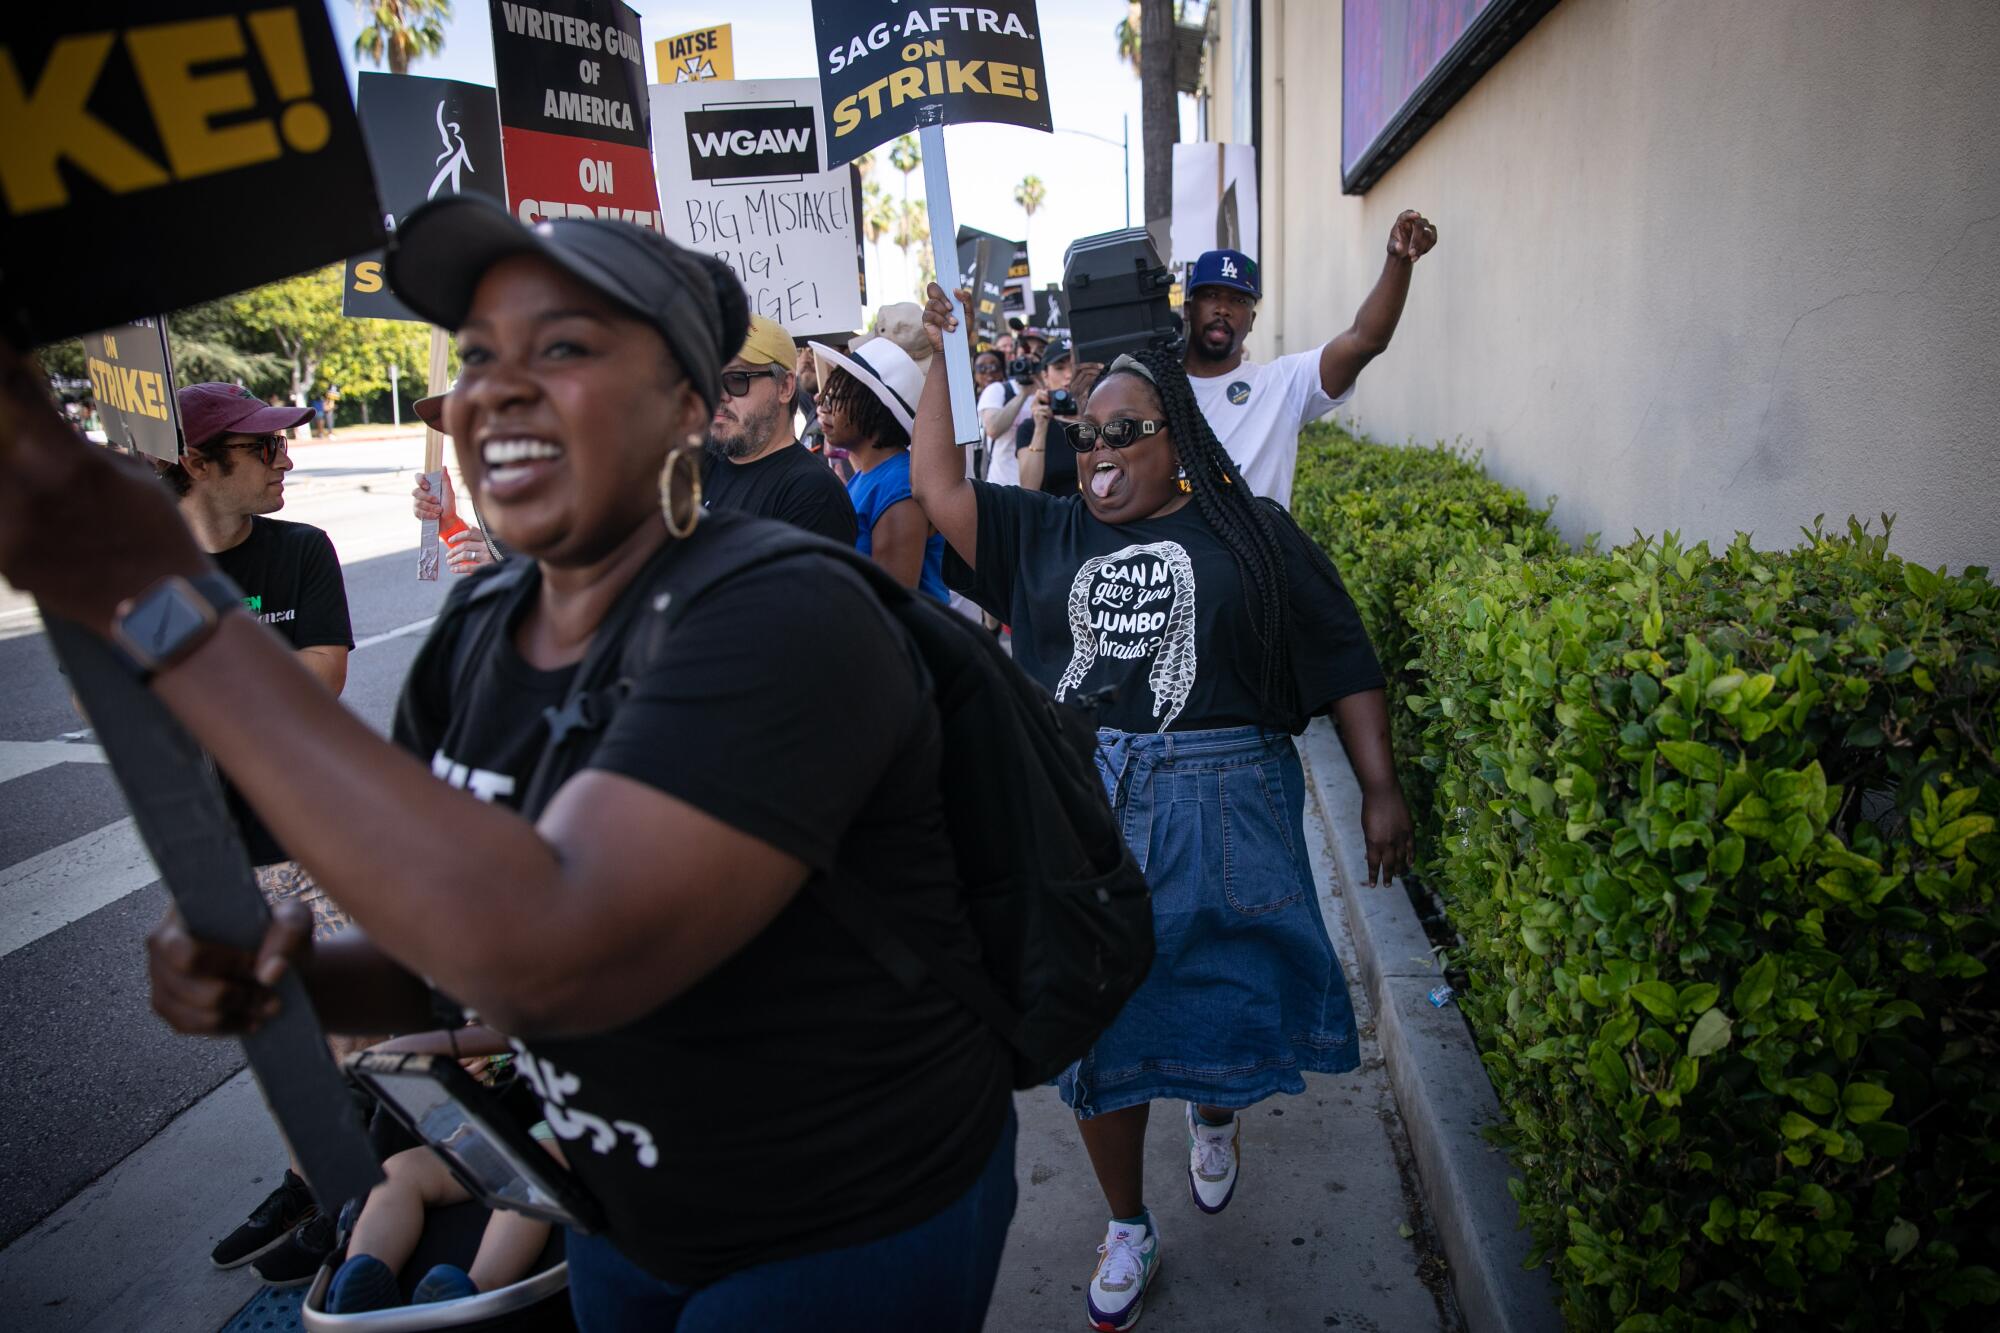 Black women marching with picket signs during writers' strike